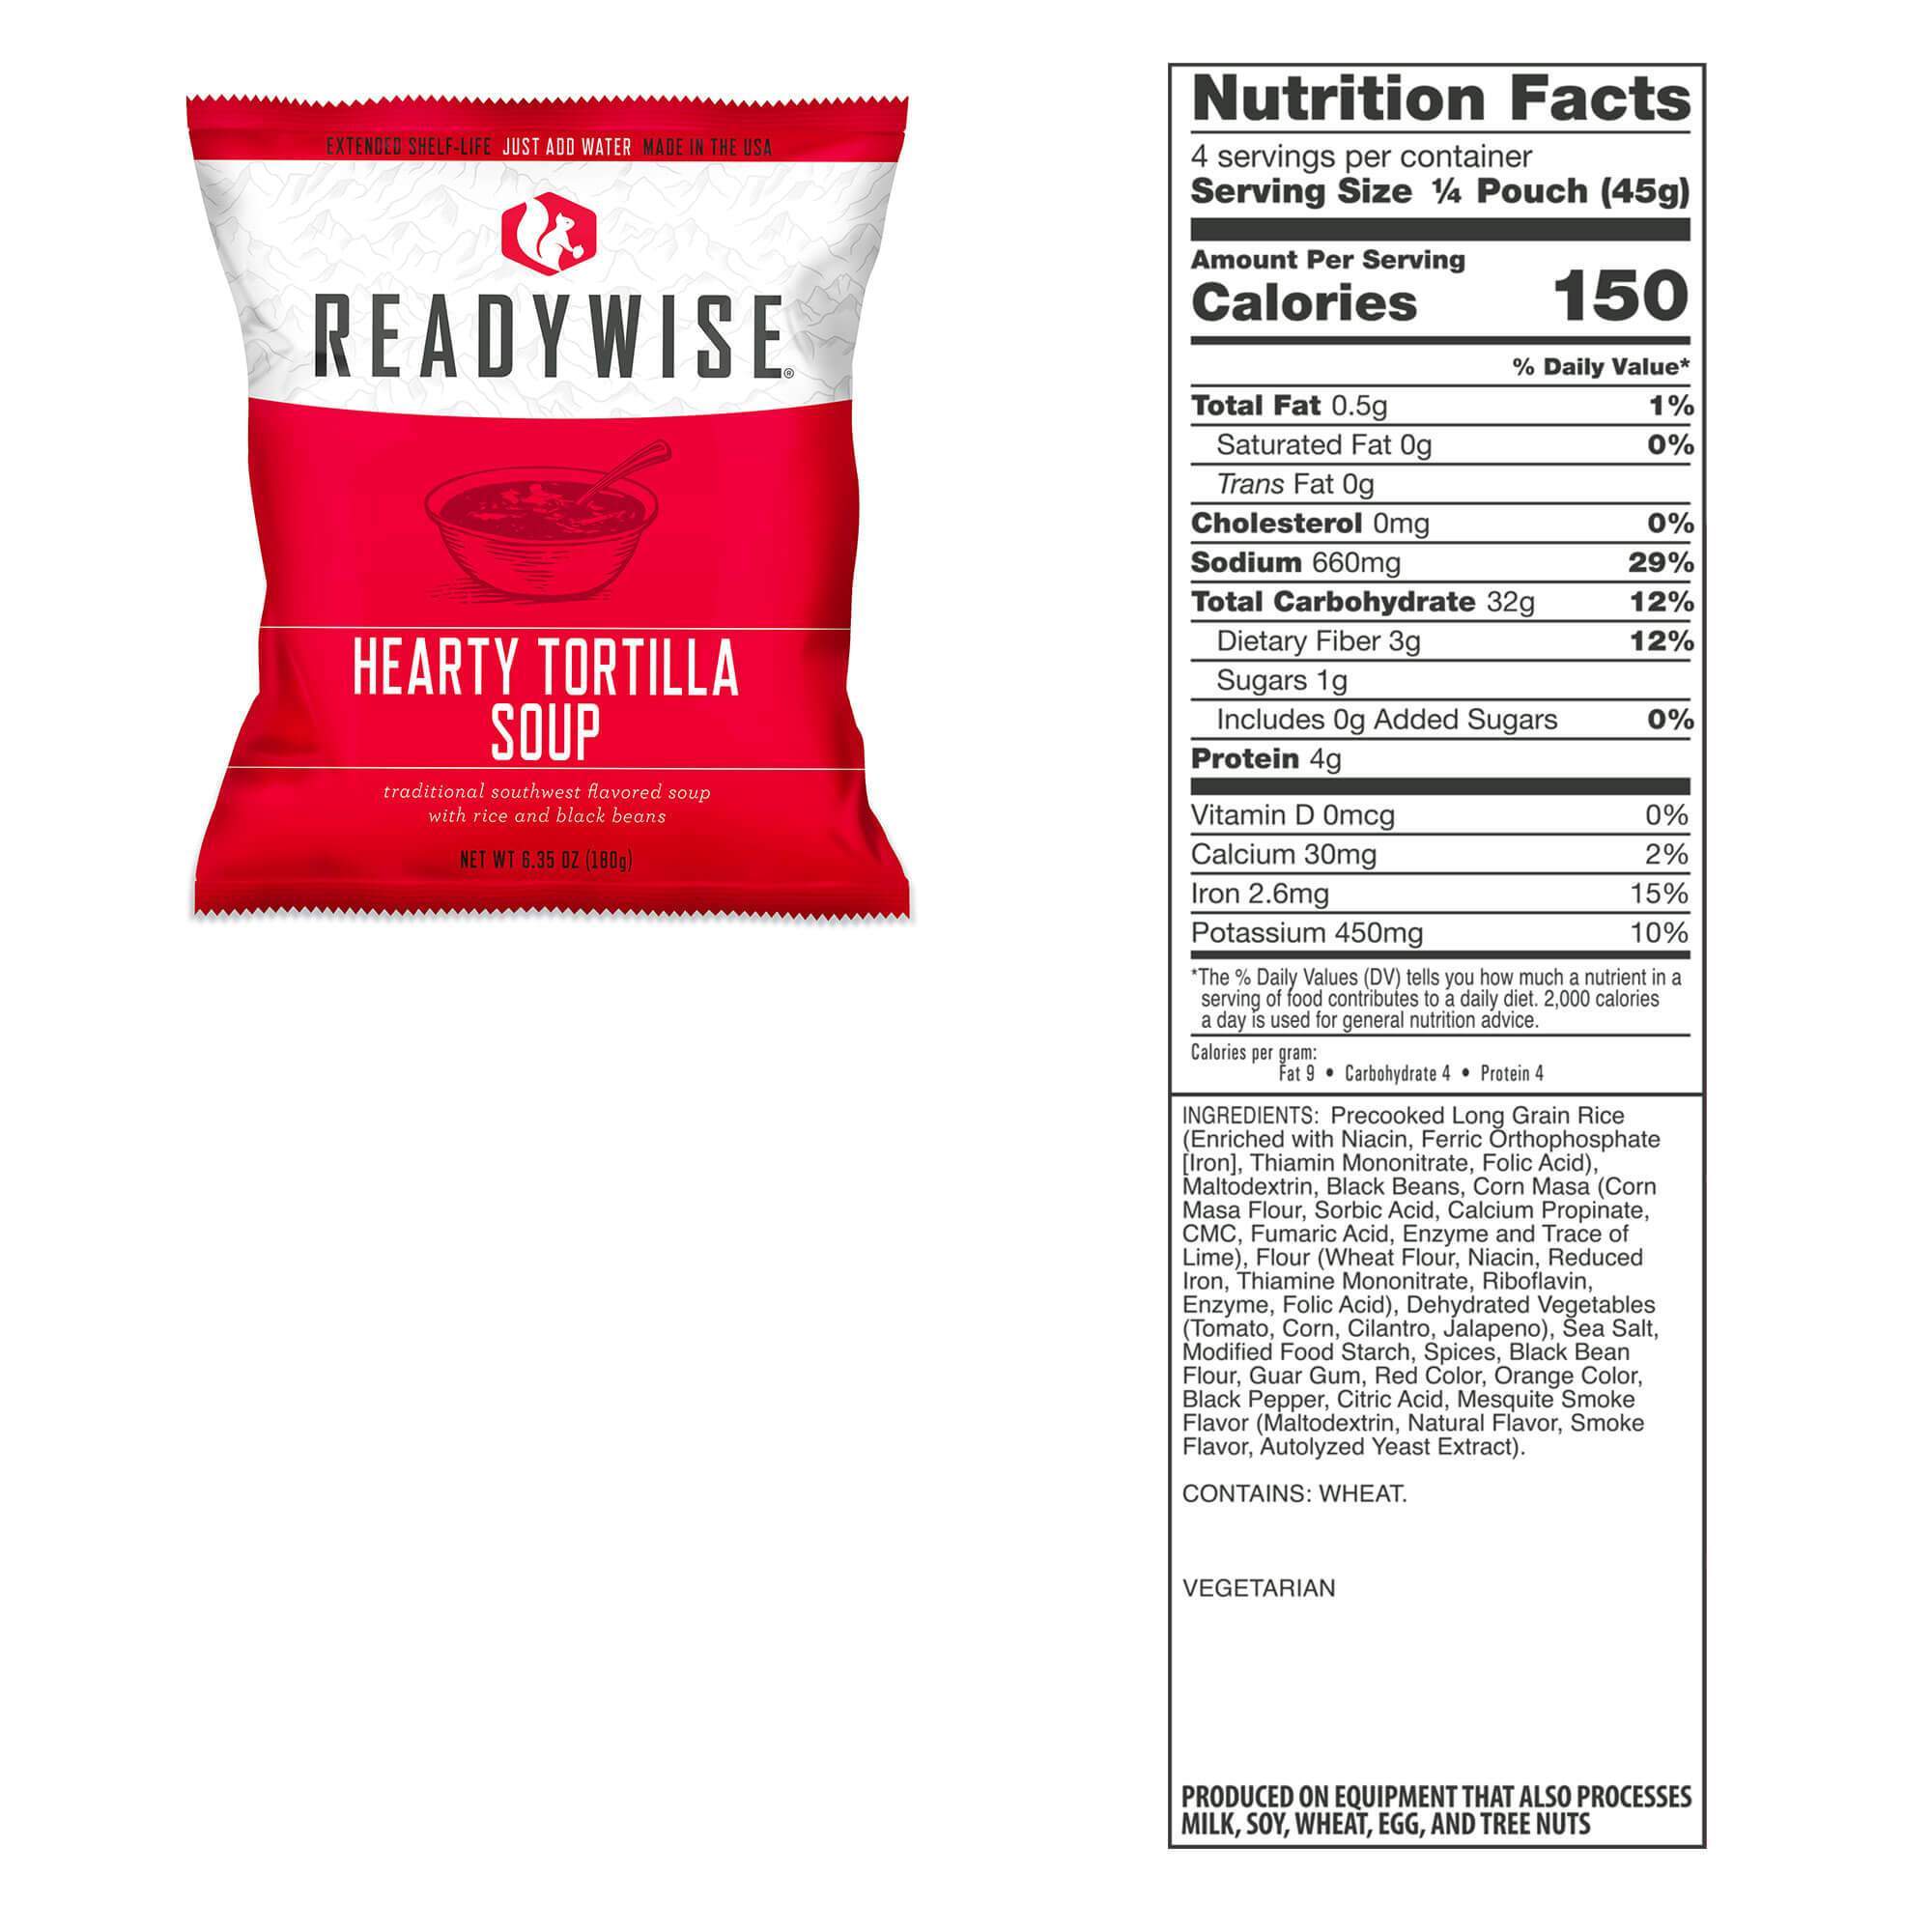 ReadyWise (formerly Wise Food Storage) 240 Serving Package of Long Term Emergency Food Supply (SHIPS IN 1-2 WEEKS) ReadyWise readywise readywise readywise readywise readywise readywise readywise.